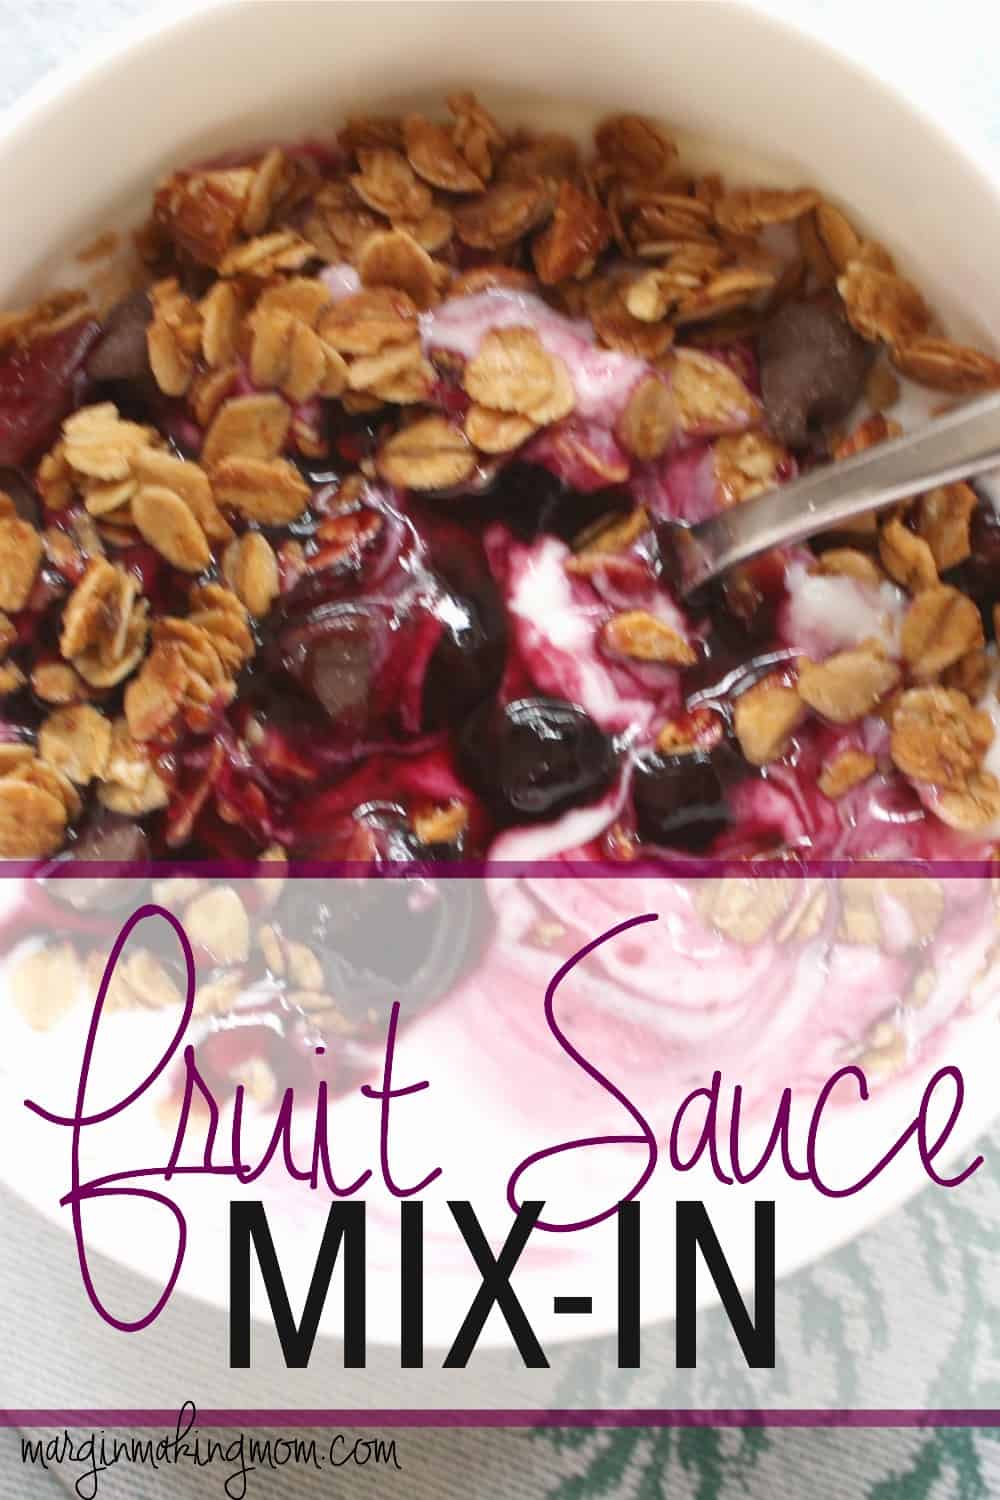 This delicious fruit sauce mix-in can be used as a topping for pancakes, cheesecake, ice cream, or mixed into yogurt or oatmeal. I love how easy it is and that it can be made with different fruits!